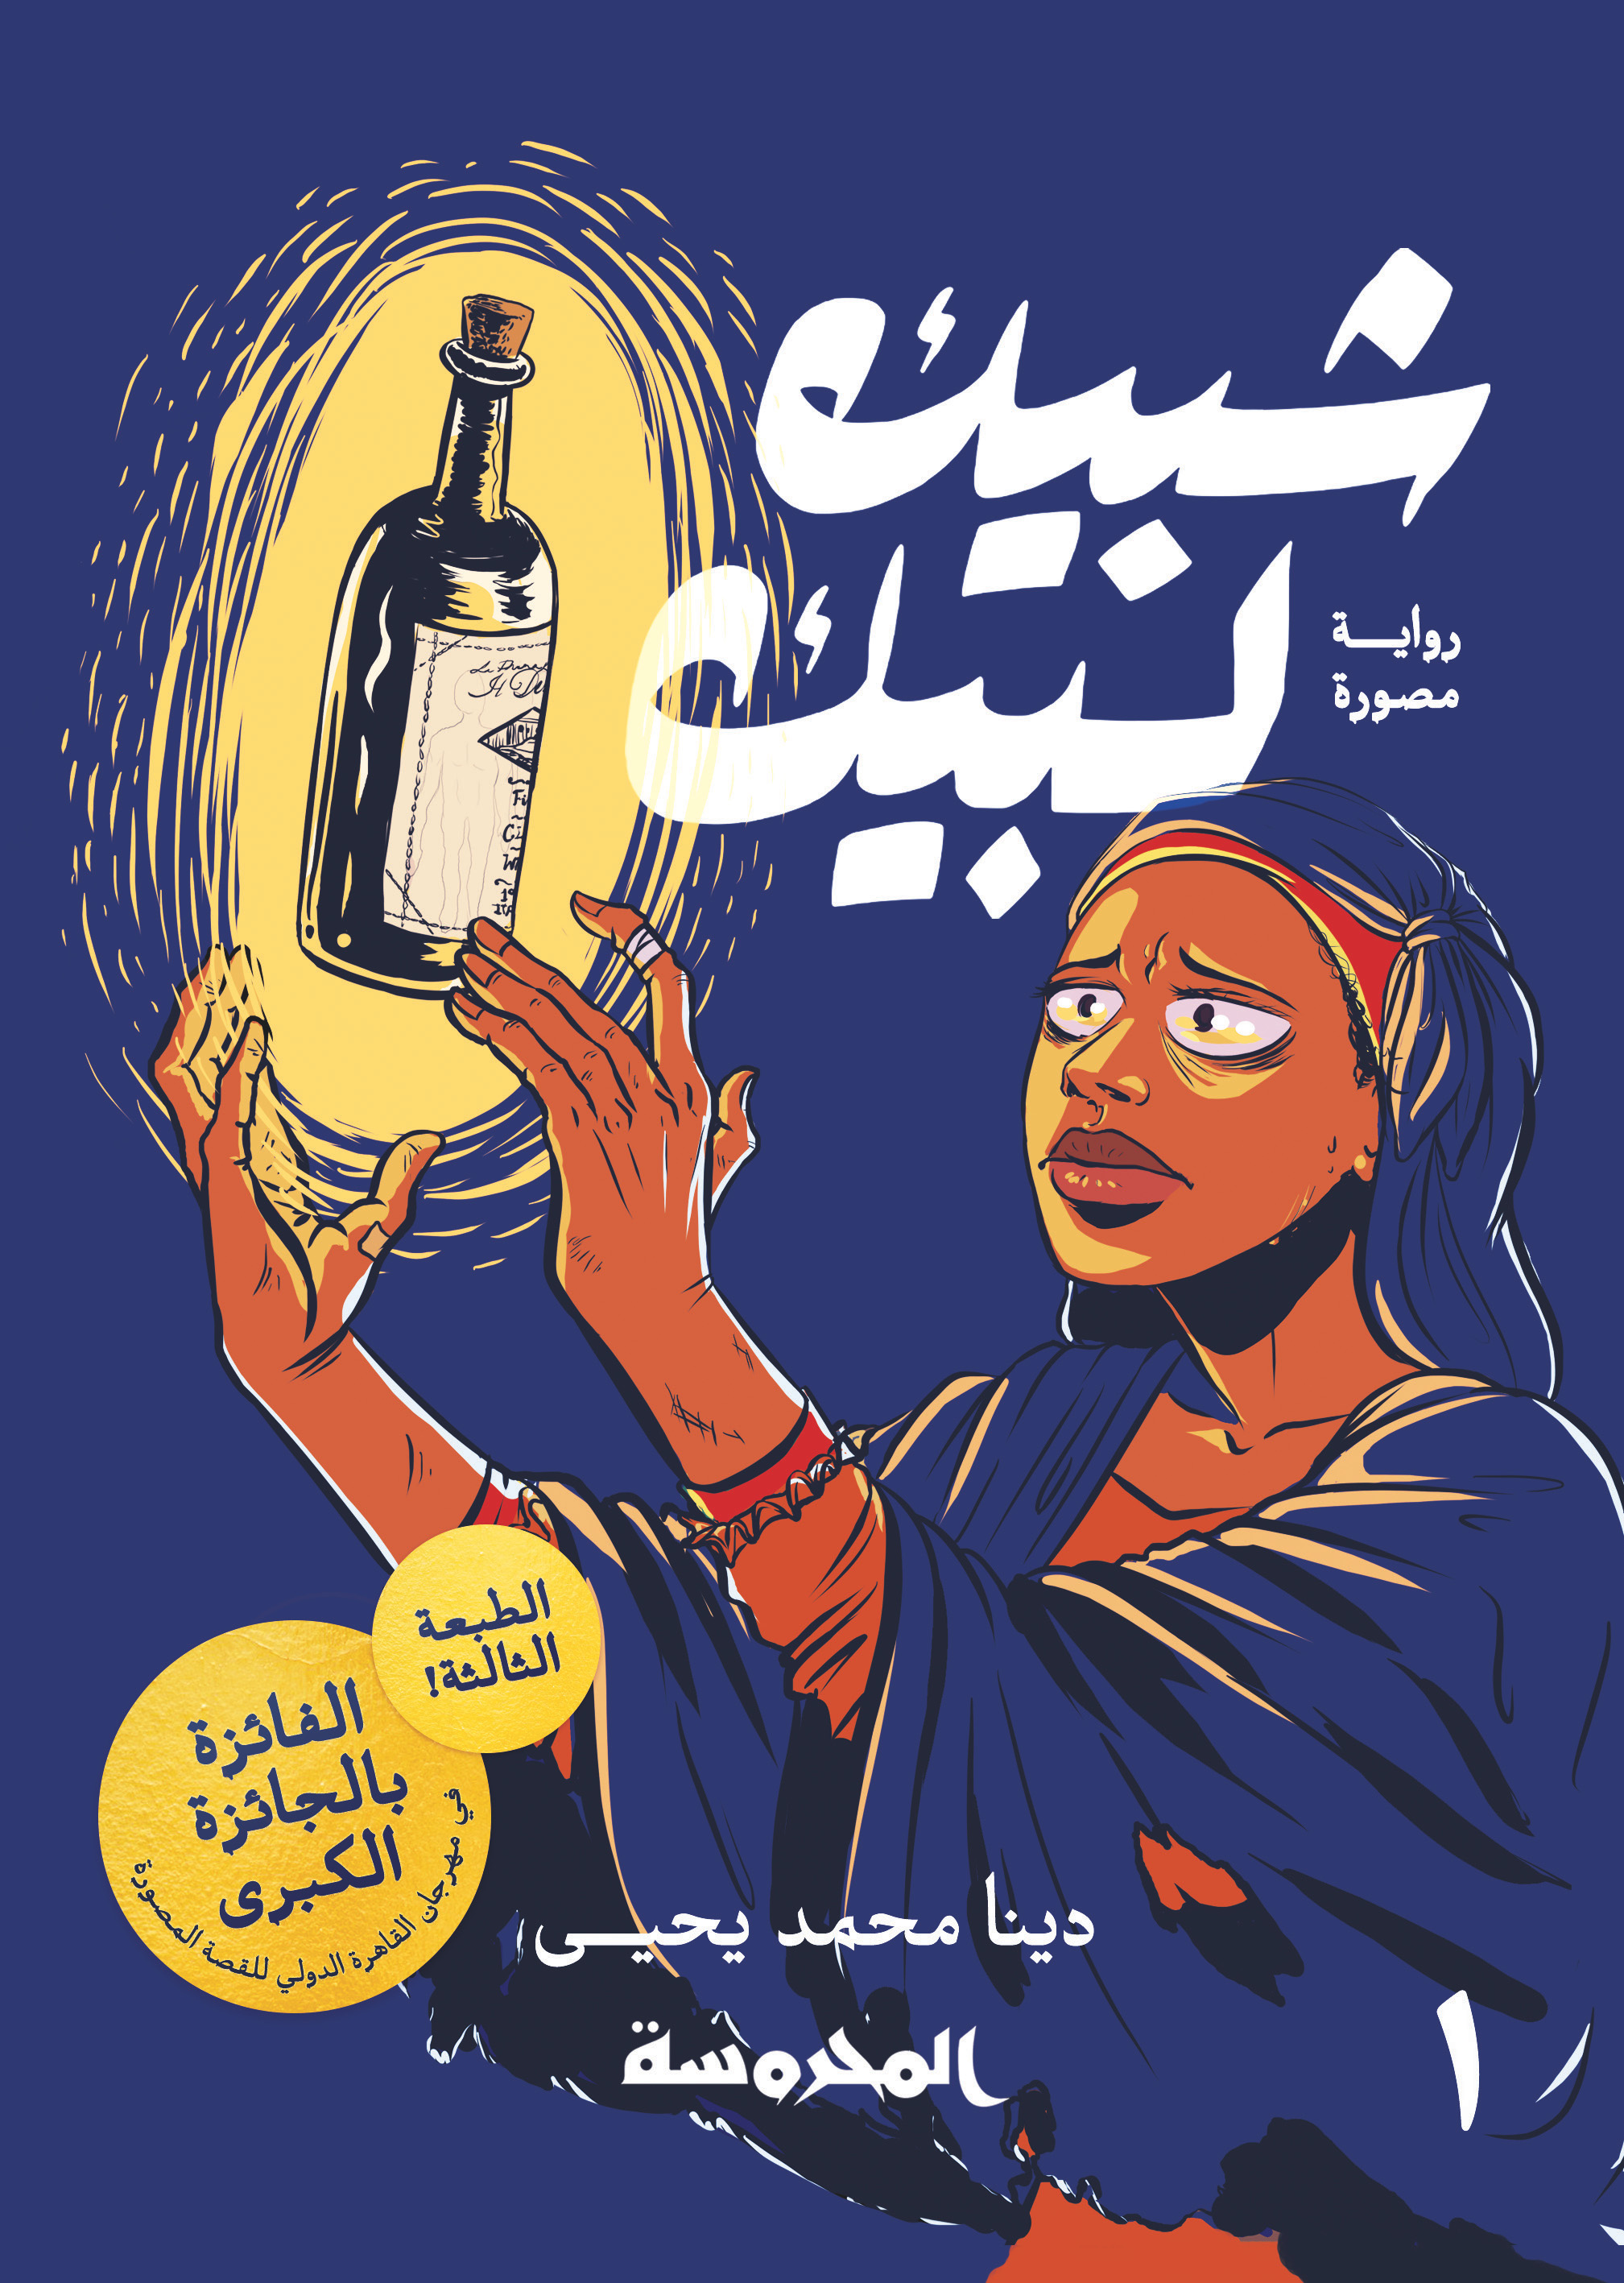 A trilogy of tales centred on wishes that fulfil the main character's needs (Deena Mohamed)